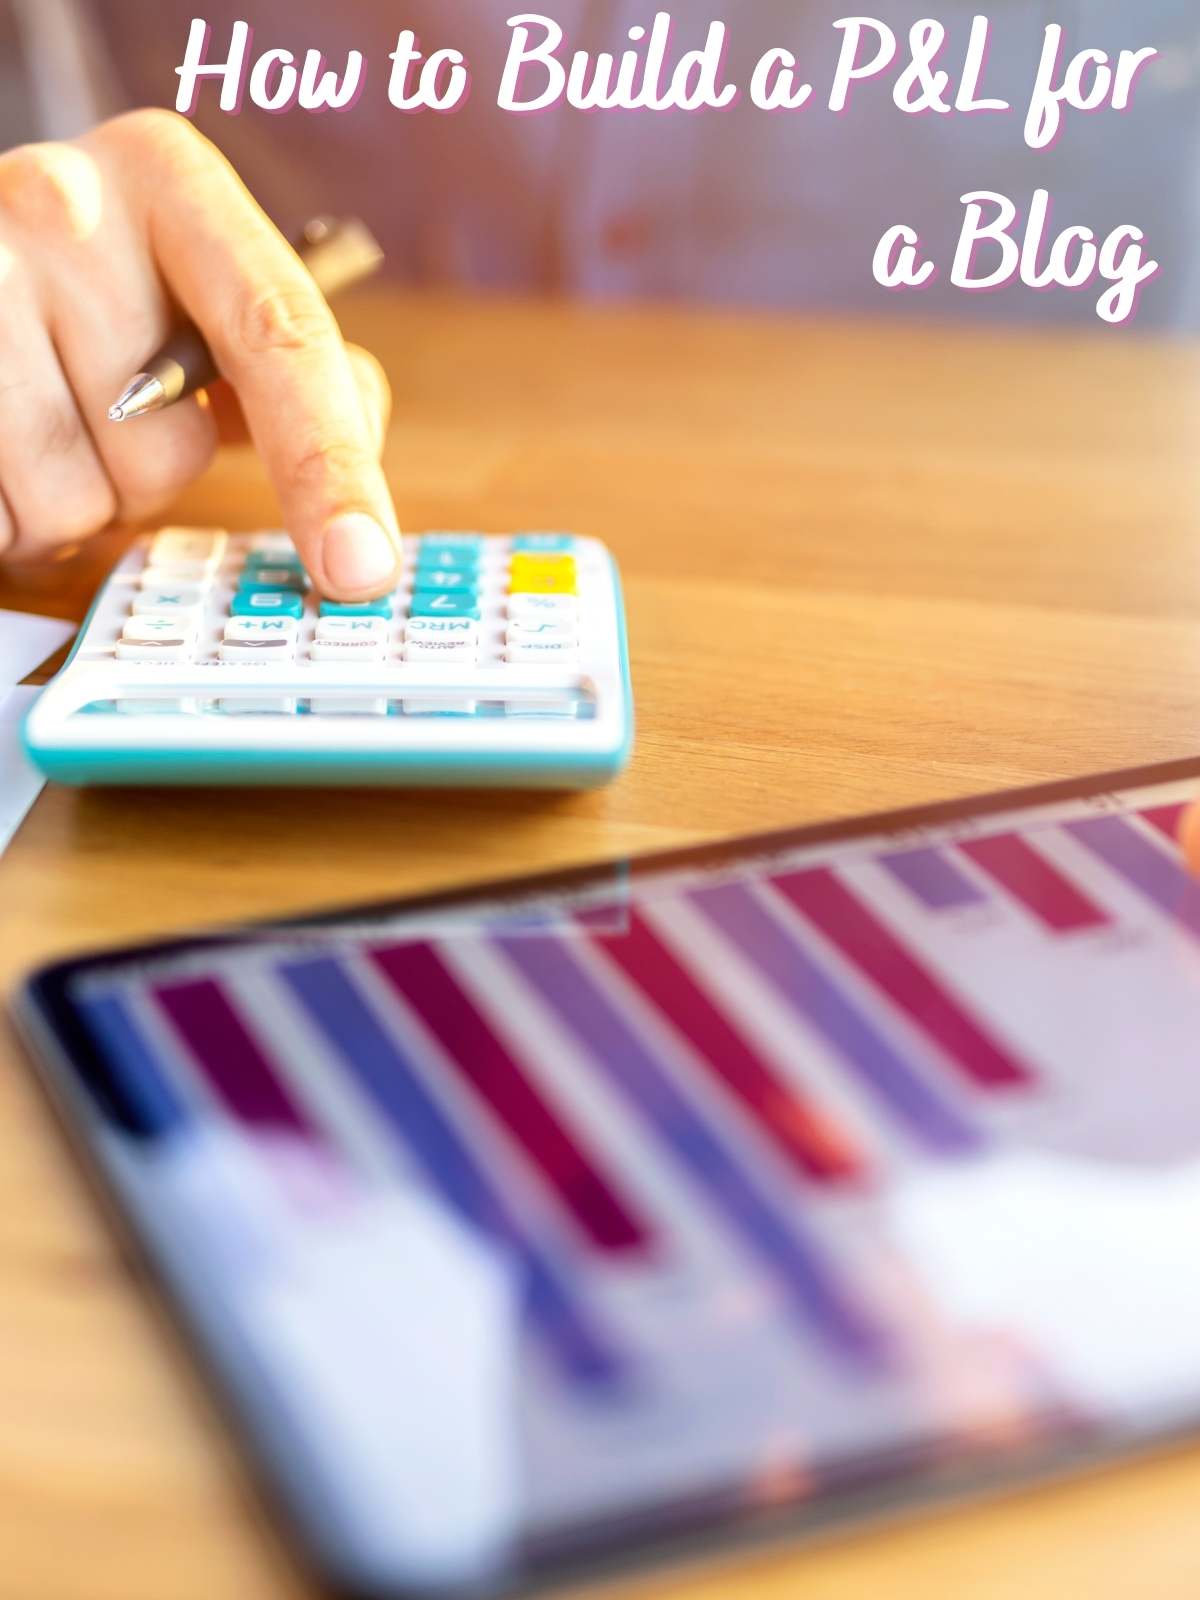 How to build a P&L for a Blog. Photo of person with calculator